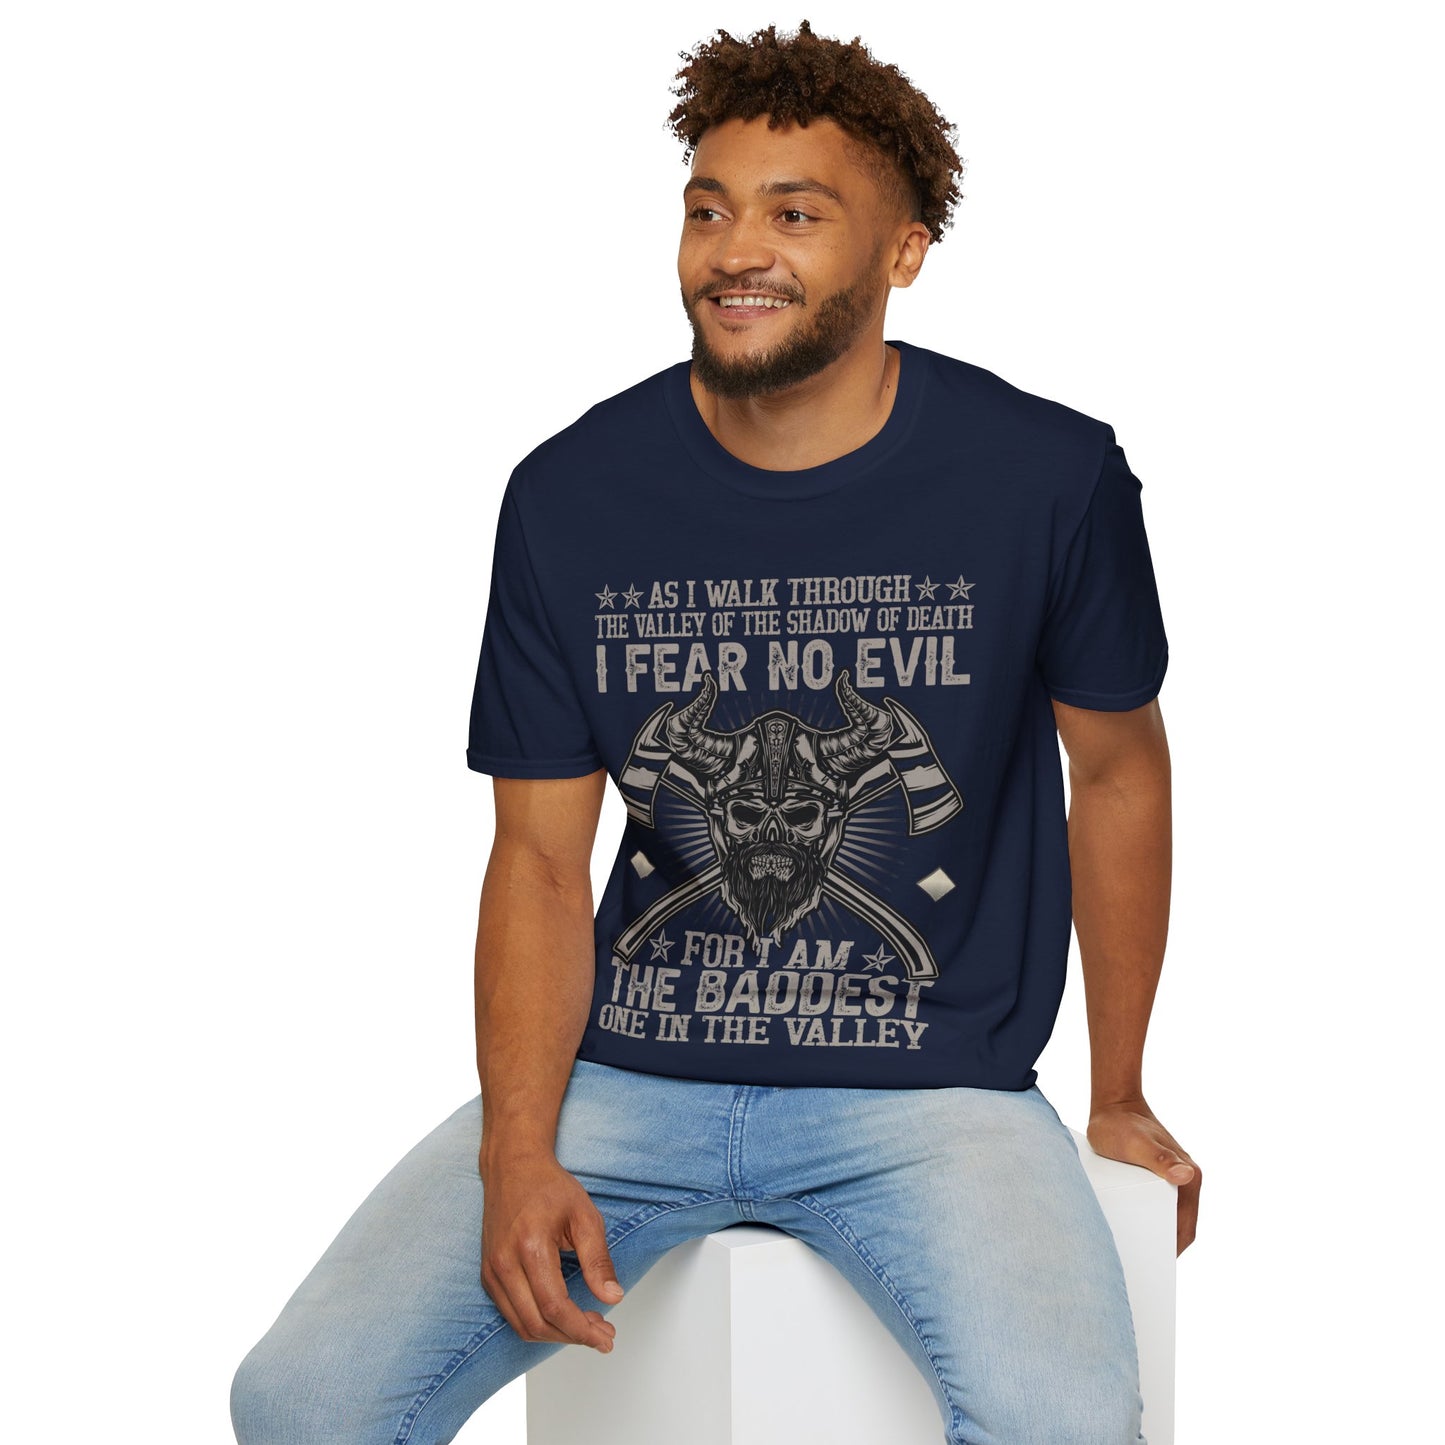 As I Walk Through The Valley Of The Shadow Of Death I Fear No Evil For I Am The Baddest One In The Valley T-Shirt